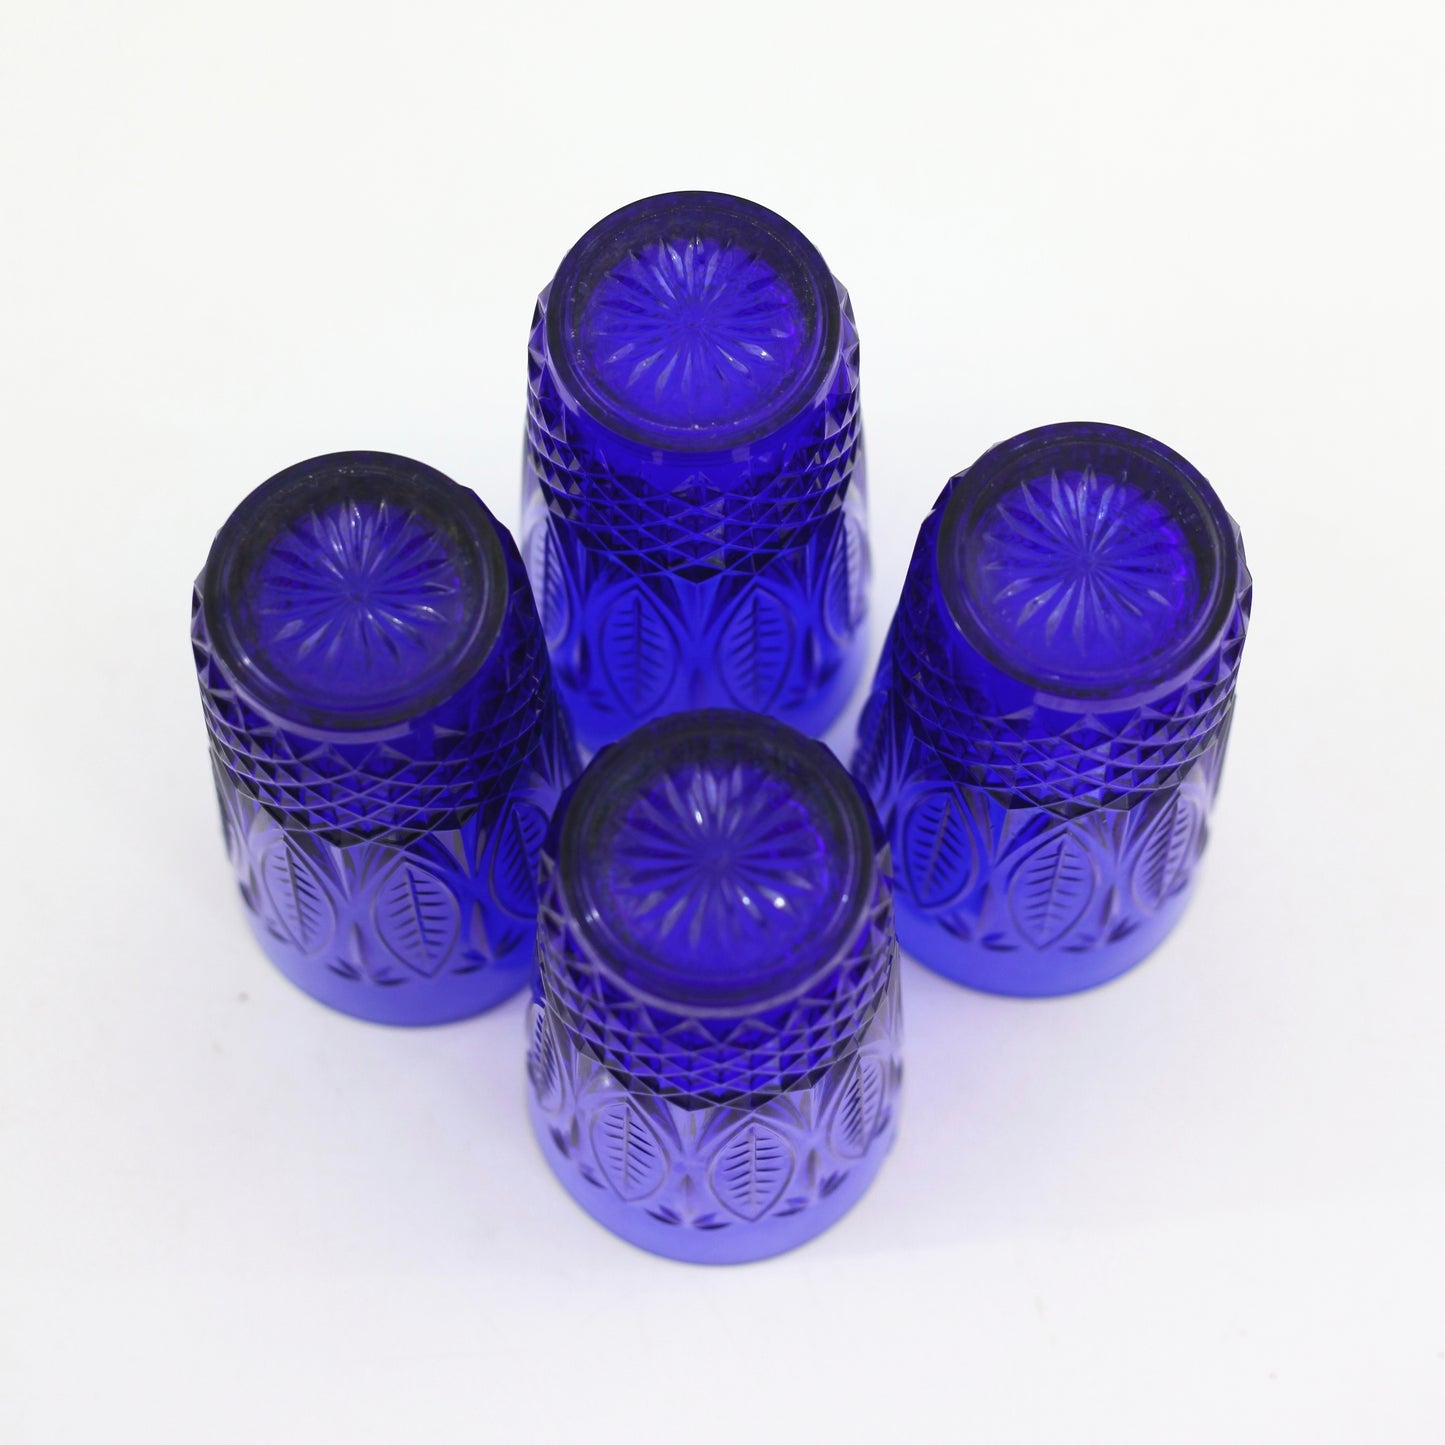 SOLD - Vintage Royal Sapphire Pressed Glass Tumblers from France